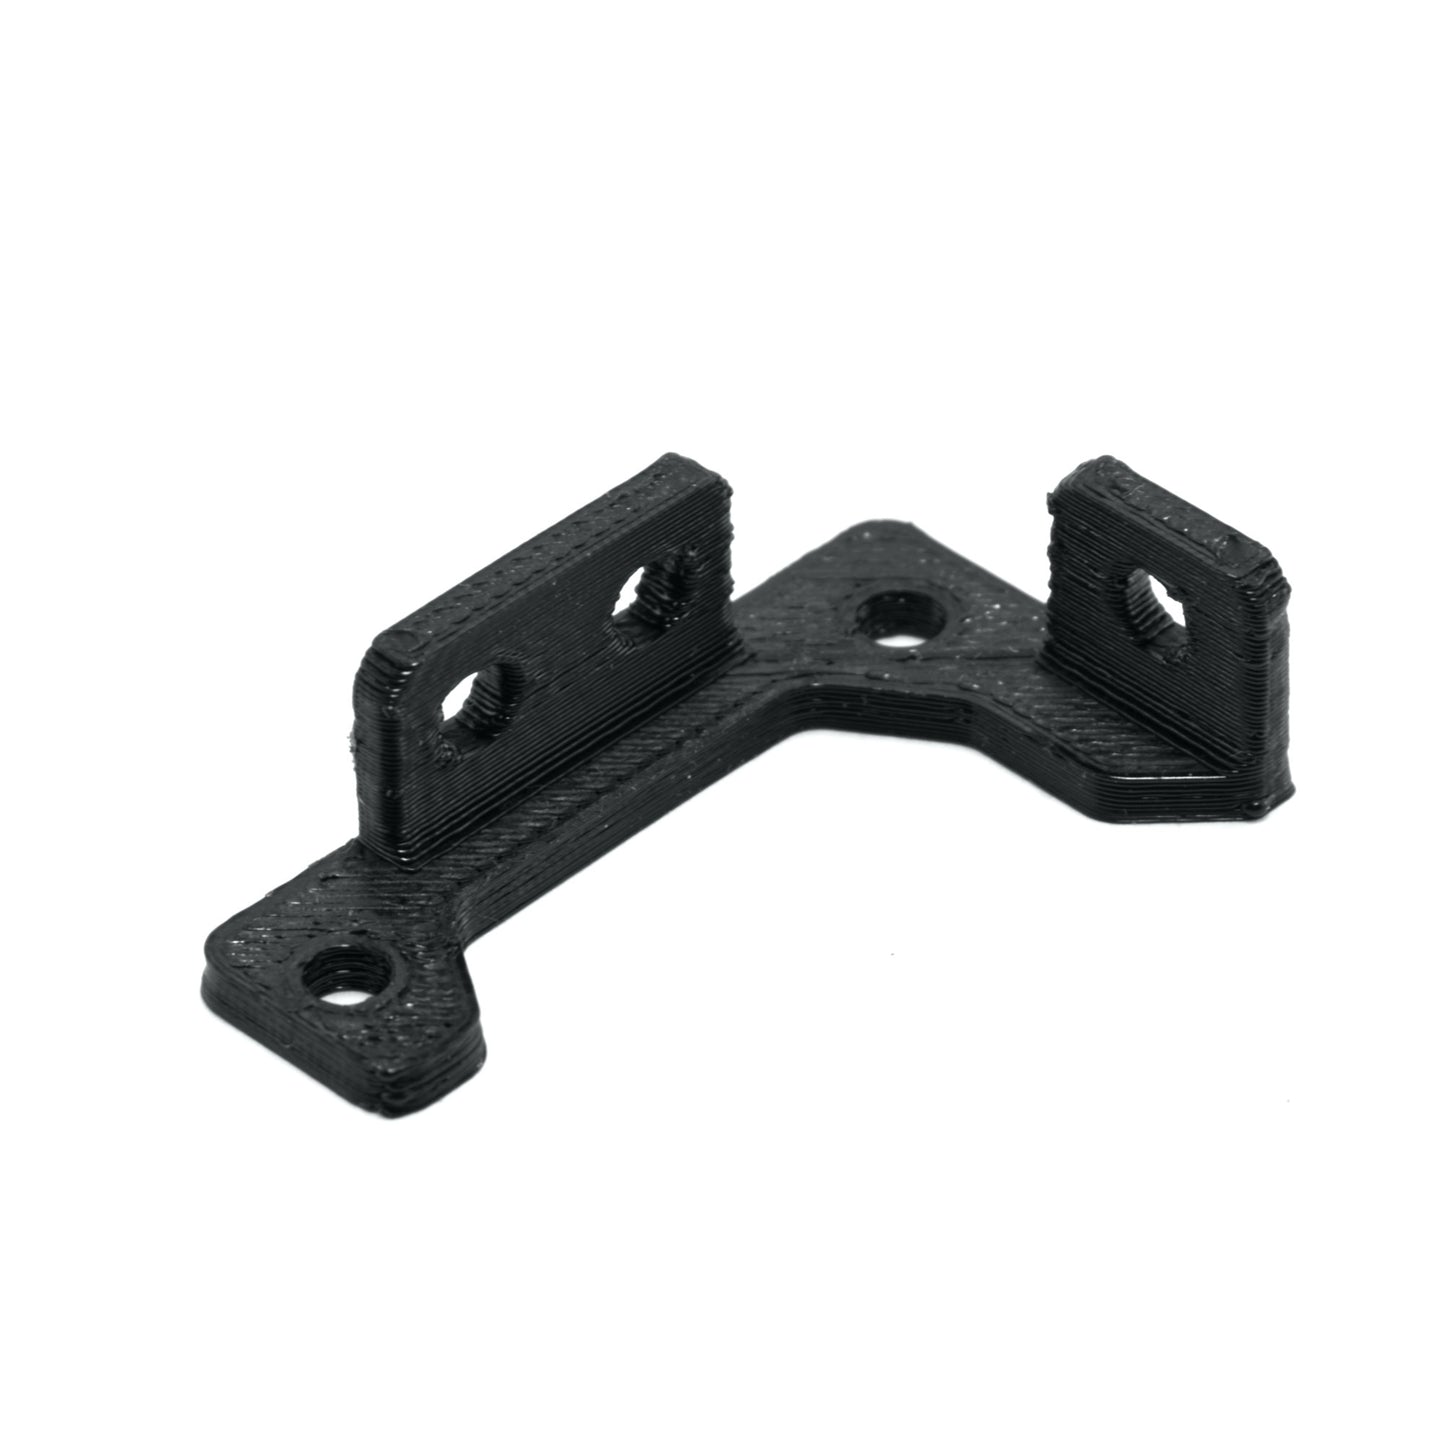 Flex ATX Power Supply Mounting Bracket for DIY projects, LED lighting & 3D Printers